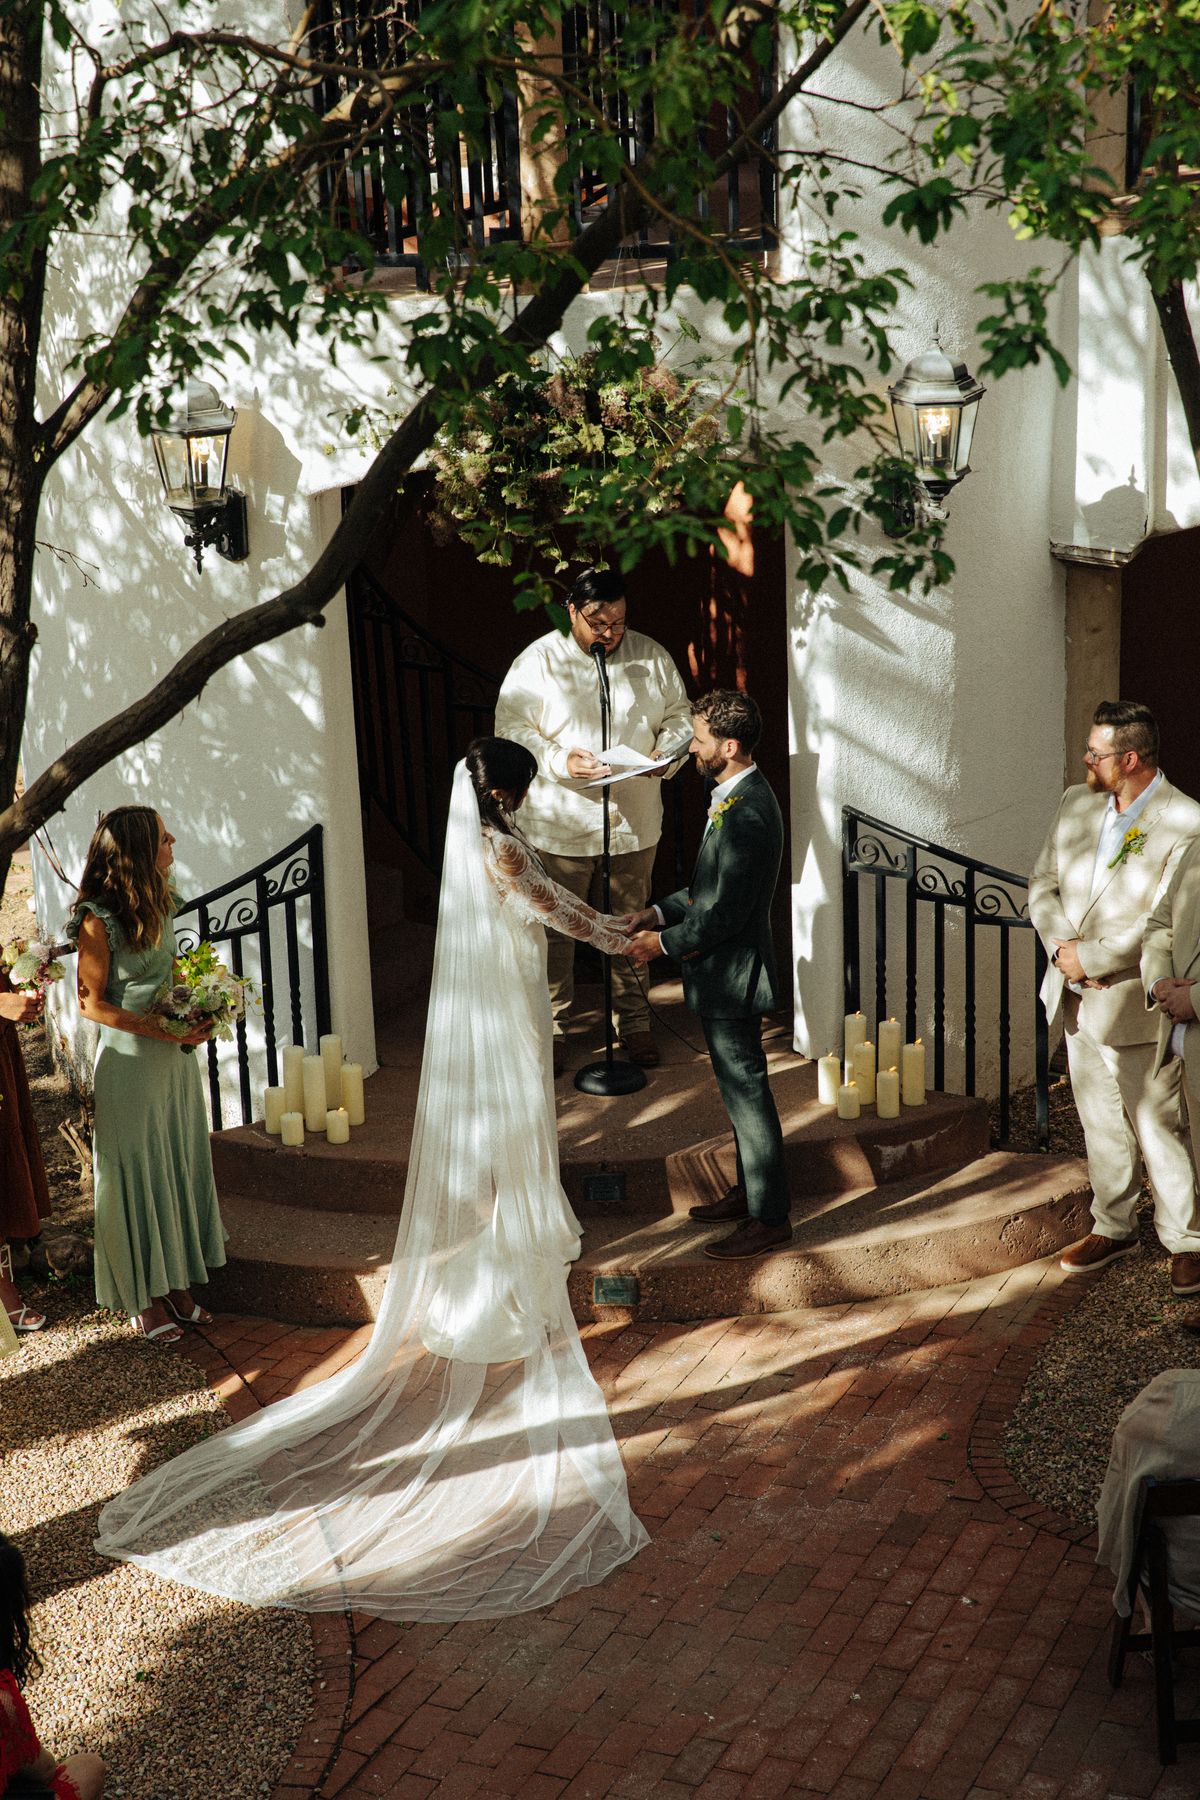 Ceremony in the Spanish Courtyard